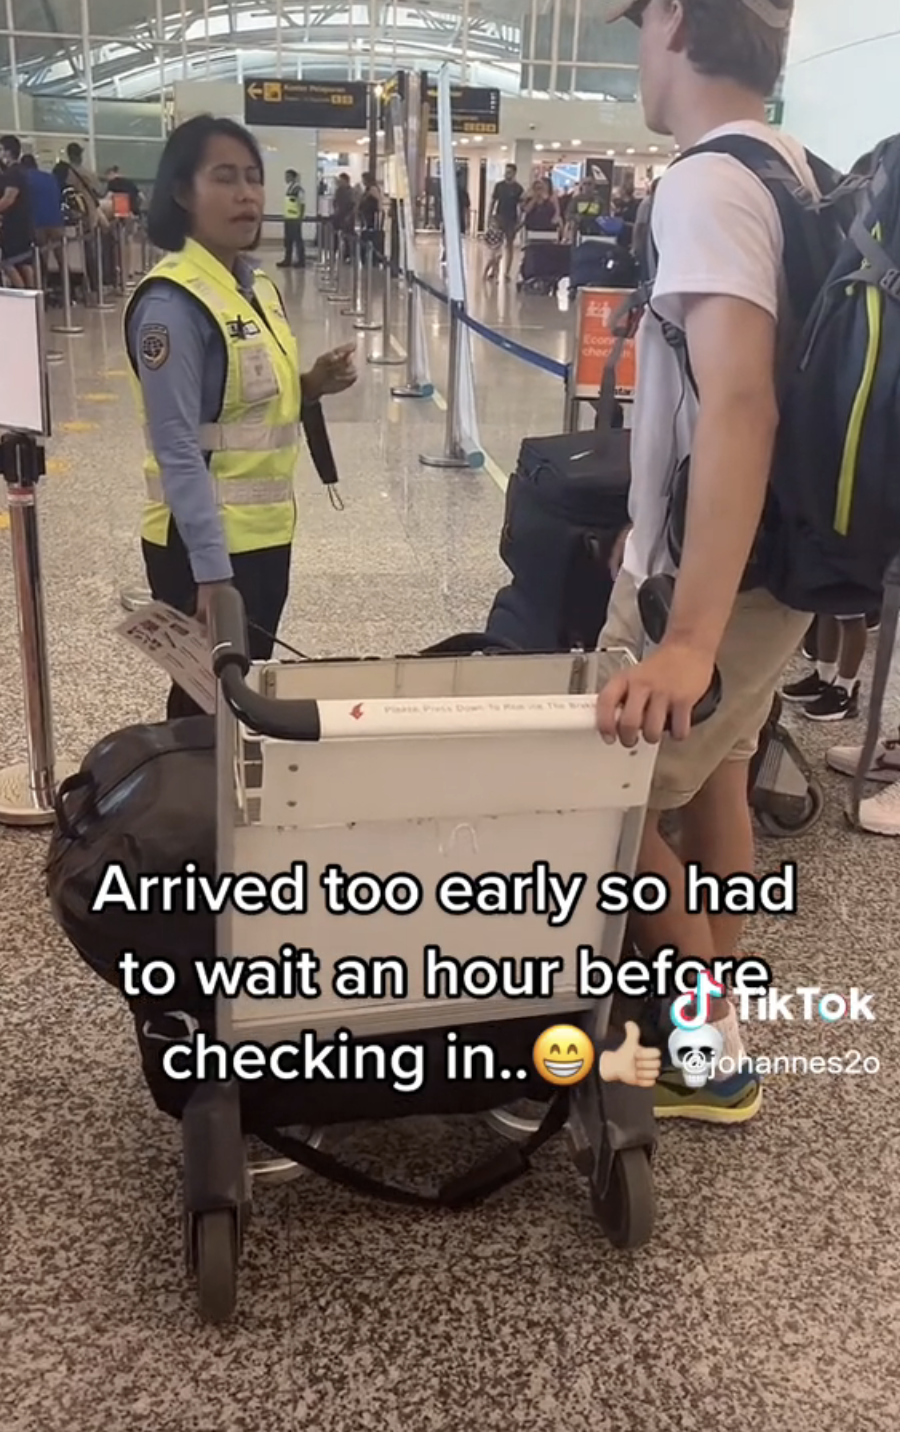 Rolv speaking to an airport agent with the caption, &quot;Arrived too early so had to wait an hour before checking in&quot; with grinning face, thumbs-up, and skull emojis